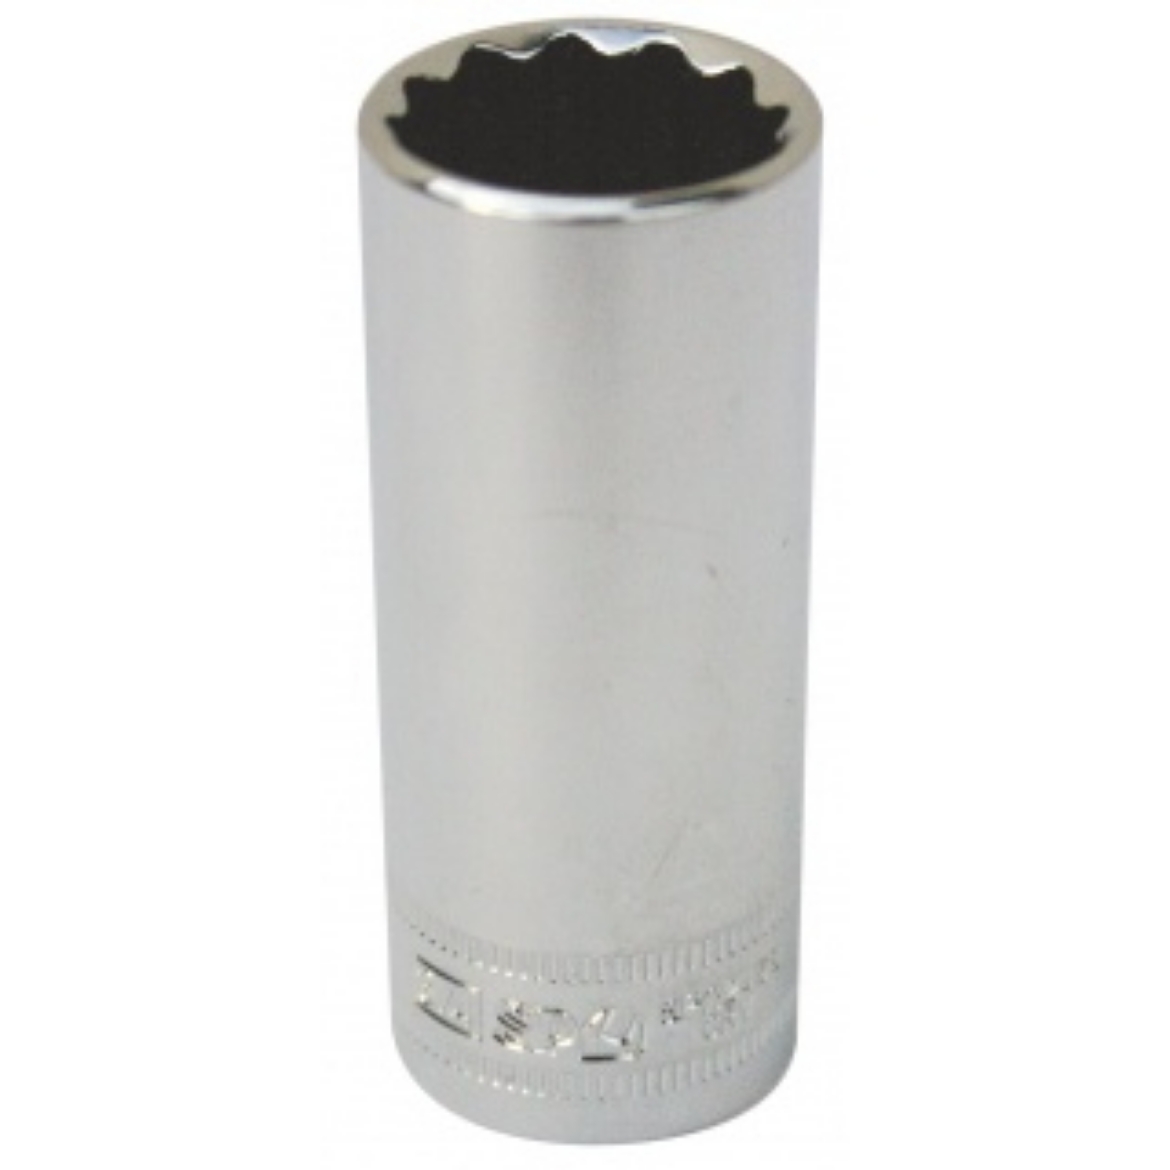 Picture of SOCKET DEEP 3/8"DR 12PT METRIC 15MM SP TOOLS